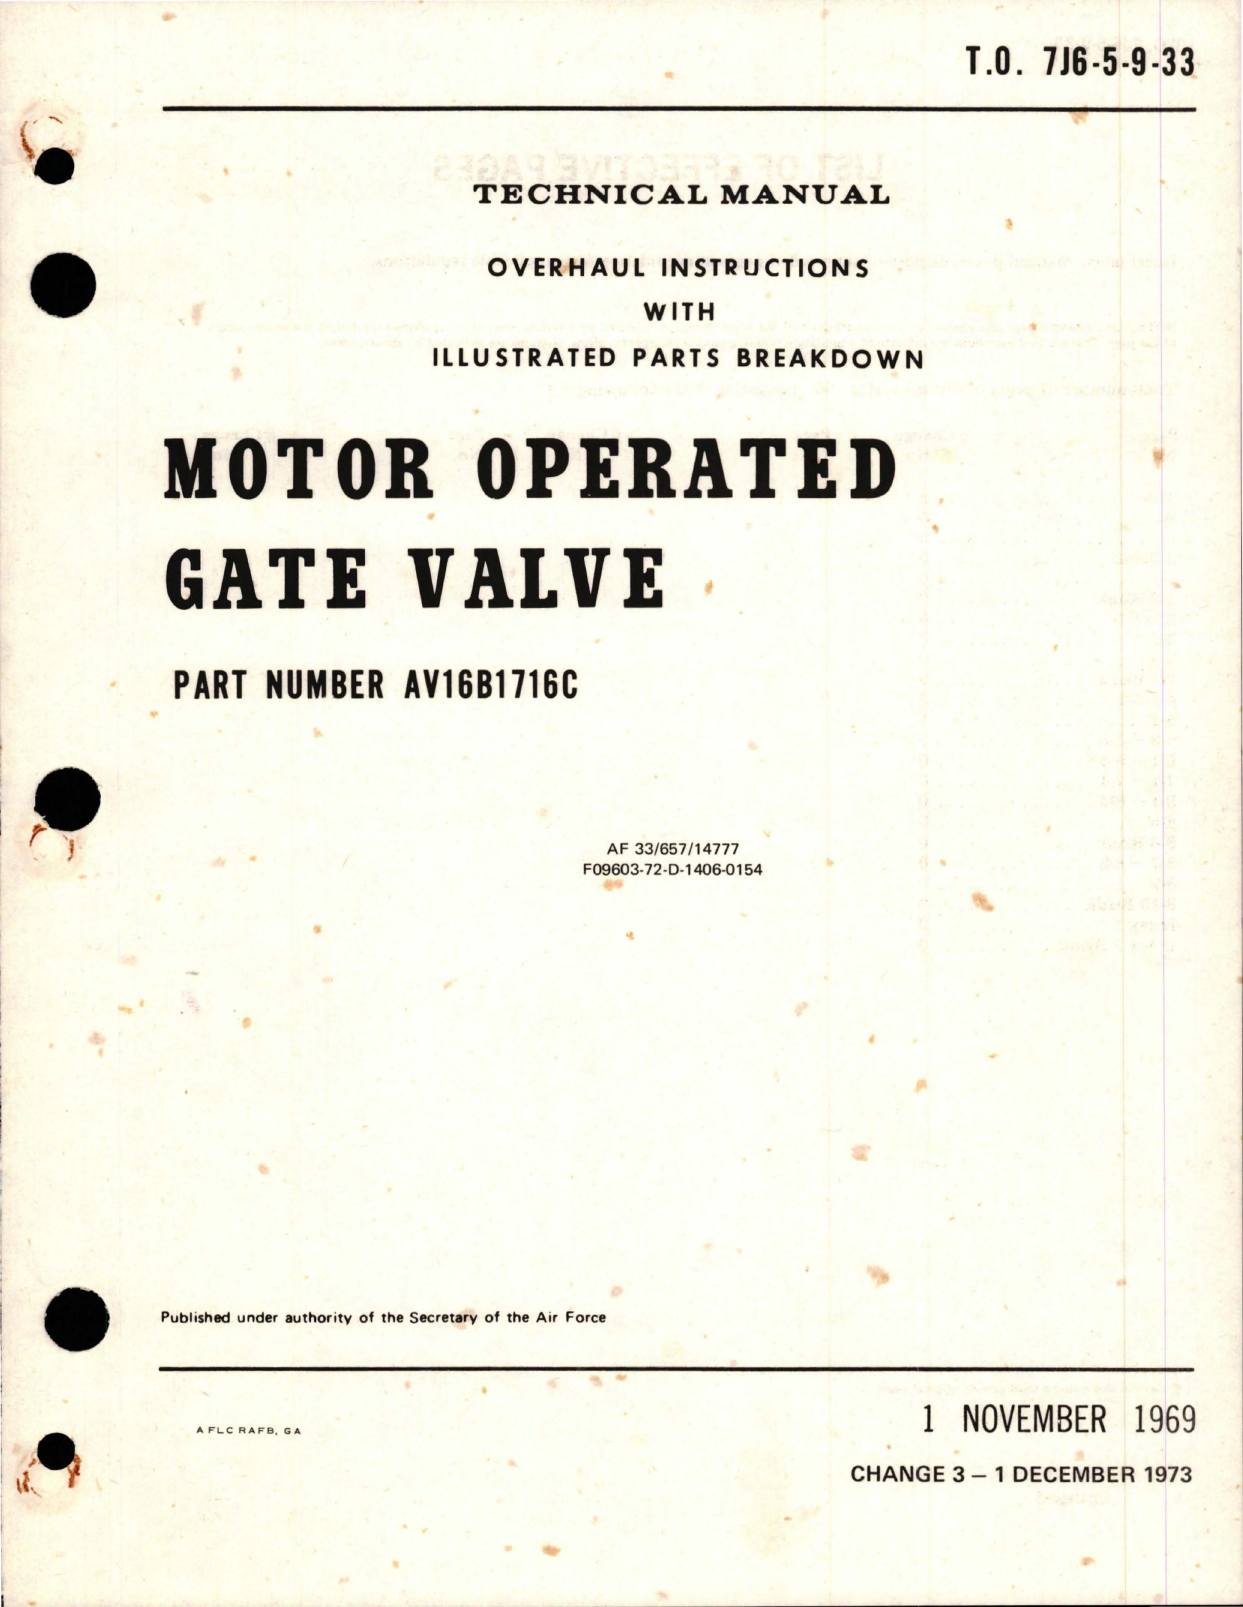 Sample page 1 from AirCorps Library document: Overhaul Instructions with Illustrated Parts Breakdown for Motor Operated Gate Valve - Part AV16B1716C